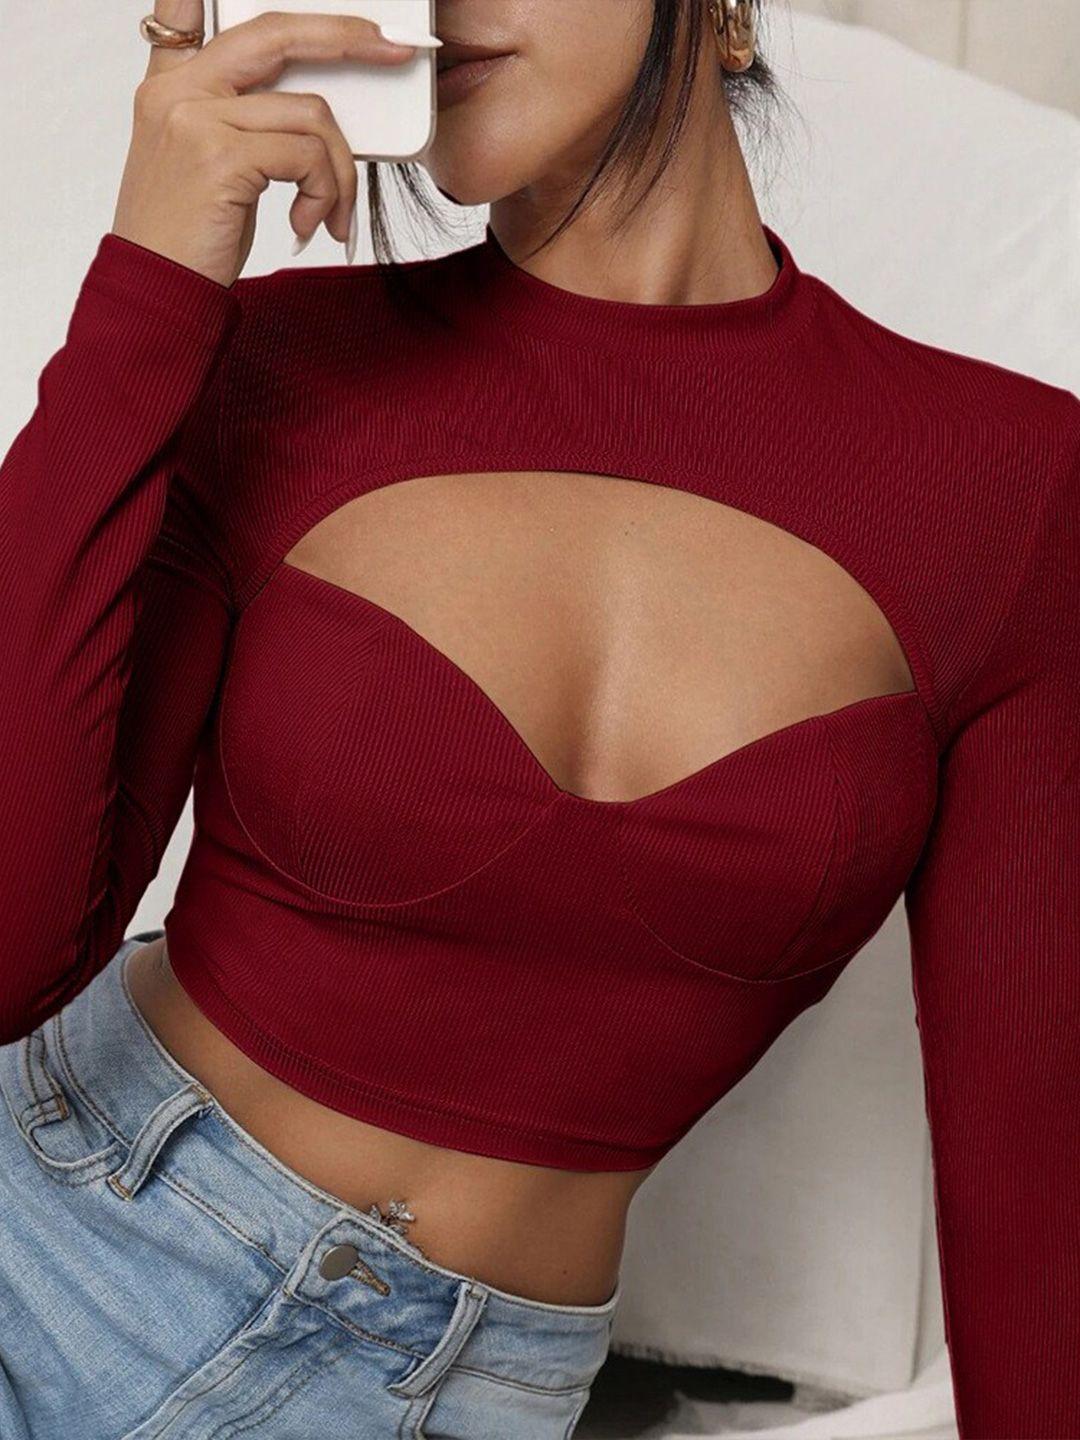 stylecast-maroon-high-neck-cut-out-detail-fitted-crop-top